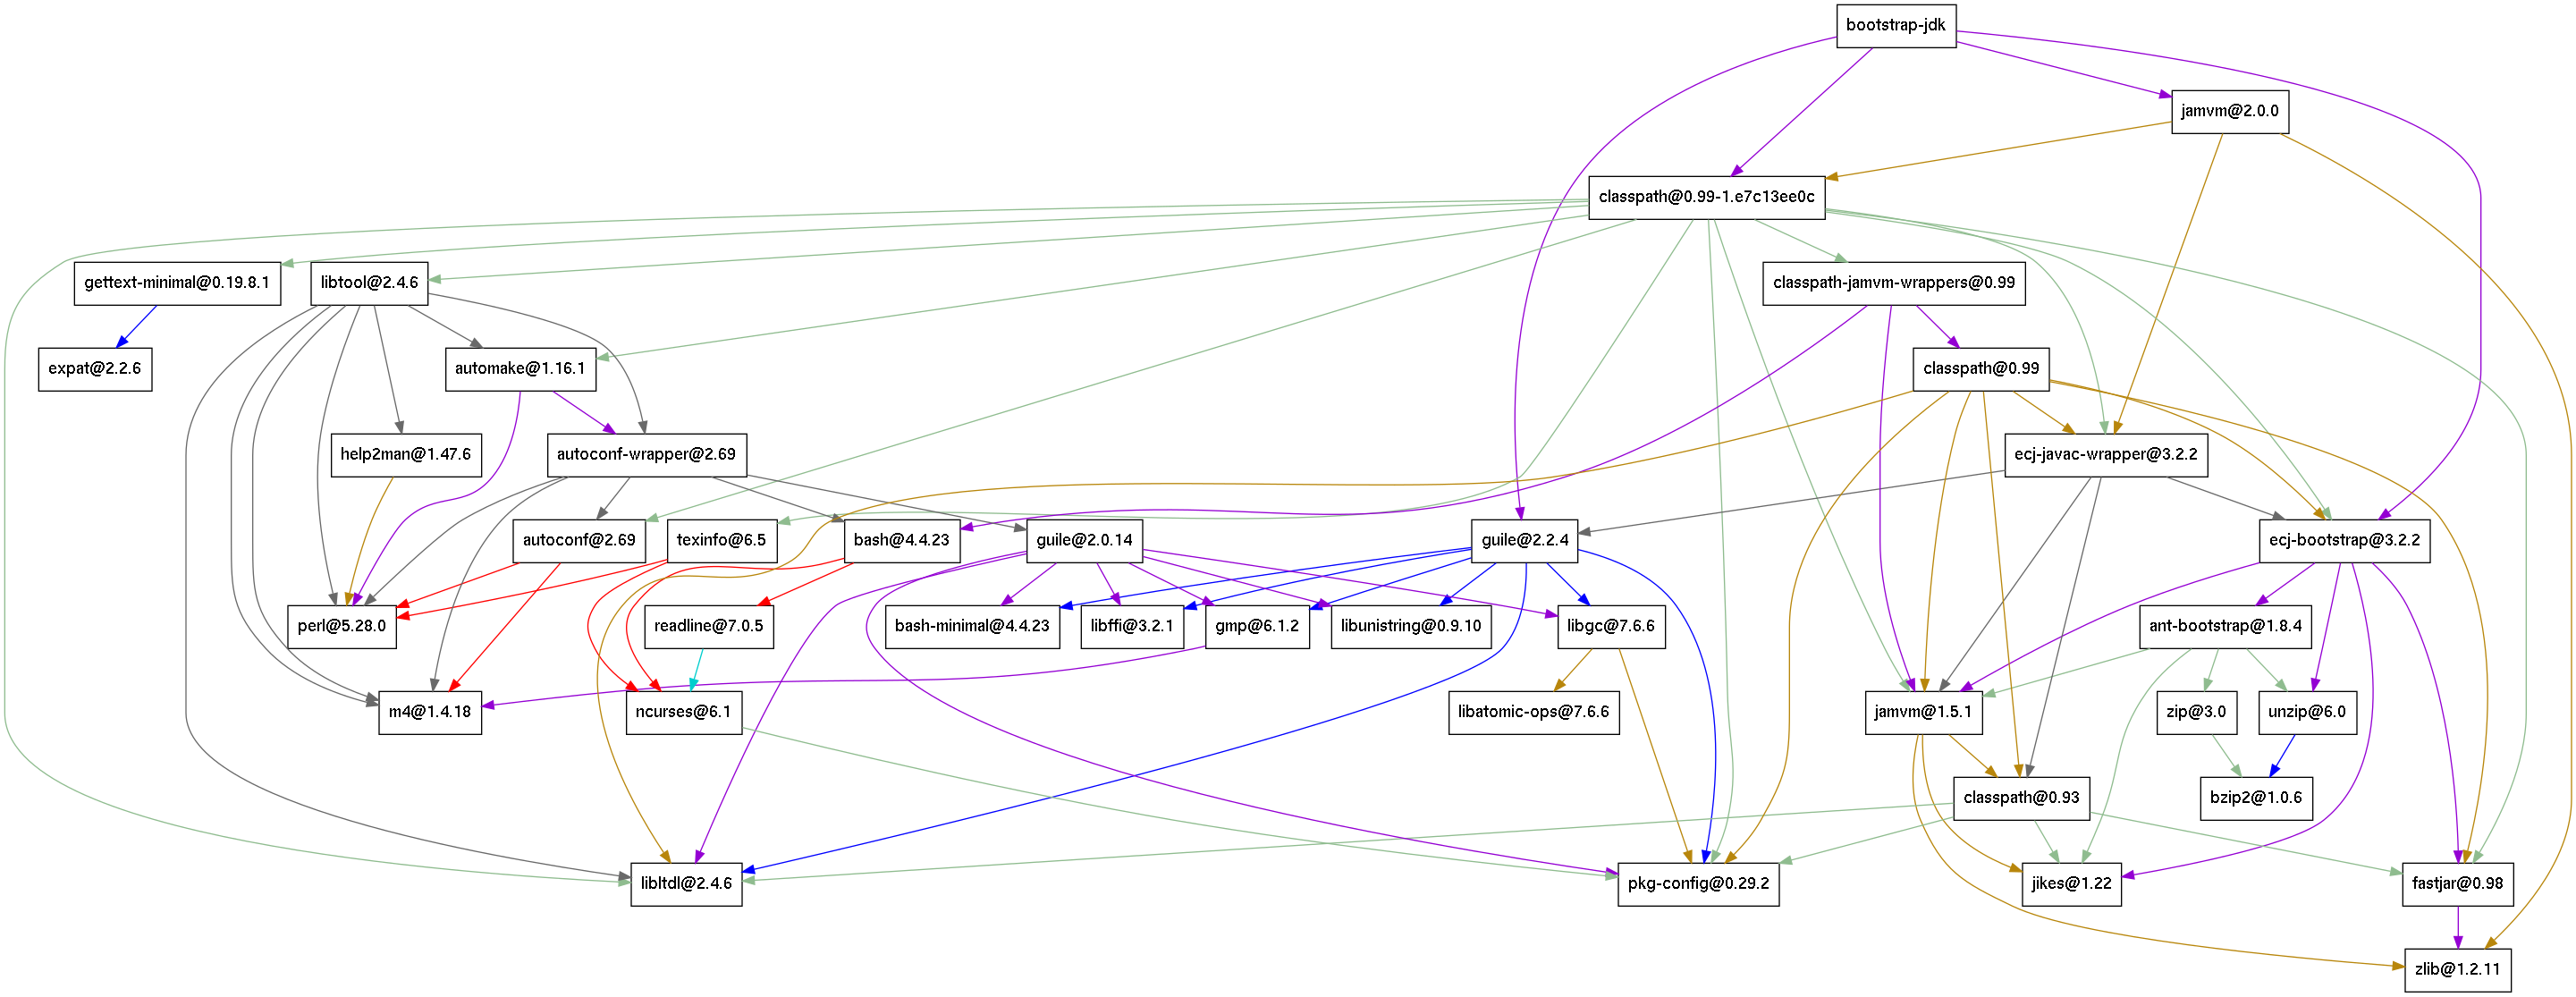 dependency graph of the bootstrap JDK in GNU Guix